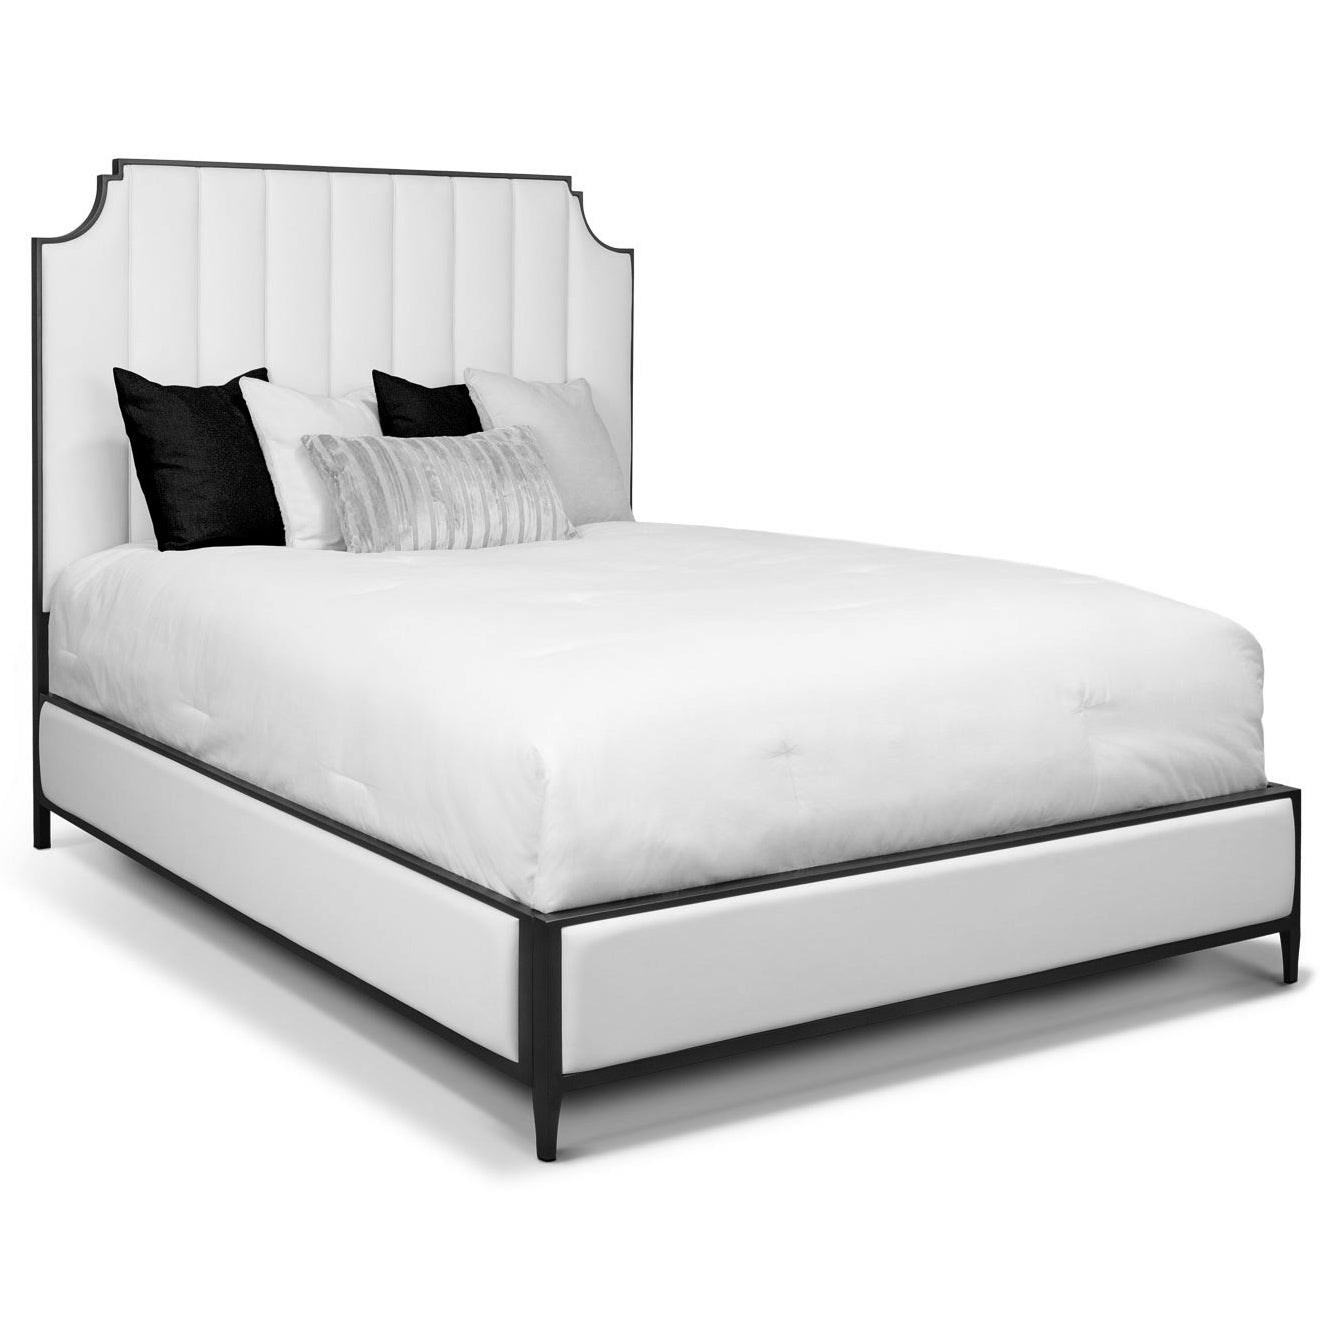 Spencer Upholstered Iron Bed 1268 Wesley Allen Queen HBFS Aspen Pure White Fabric Matriae